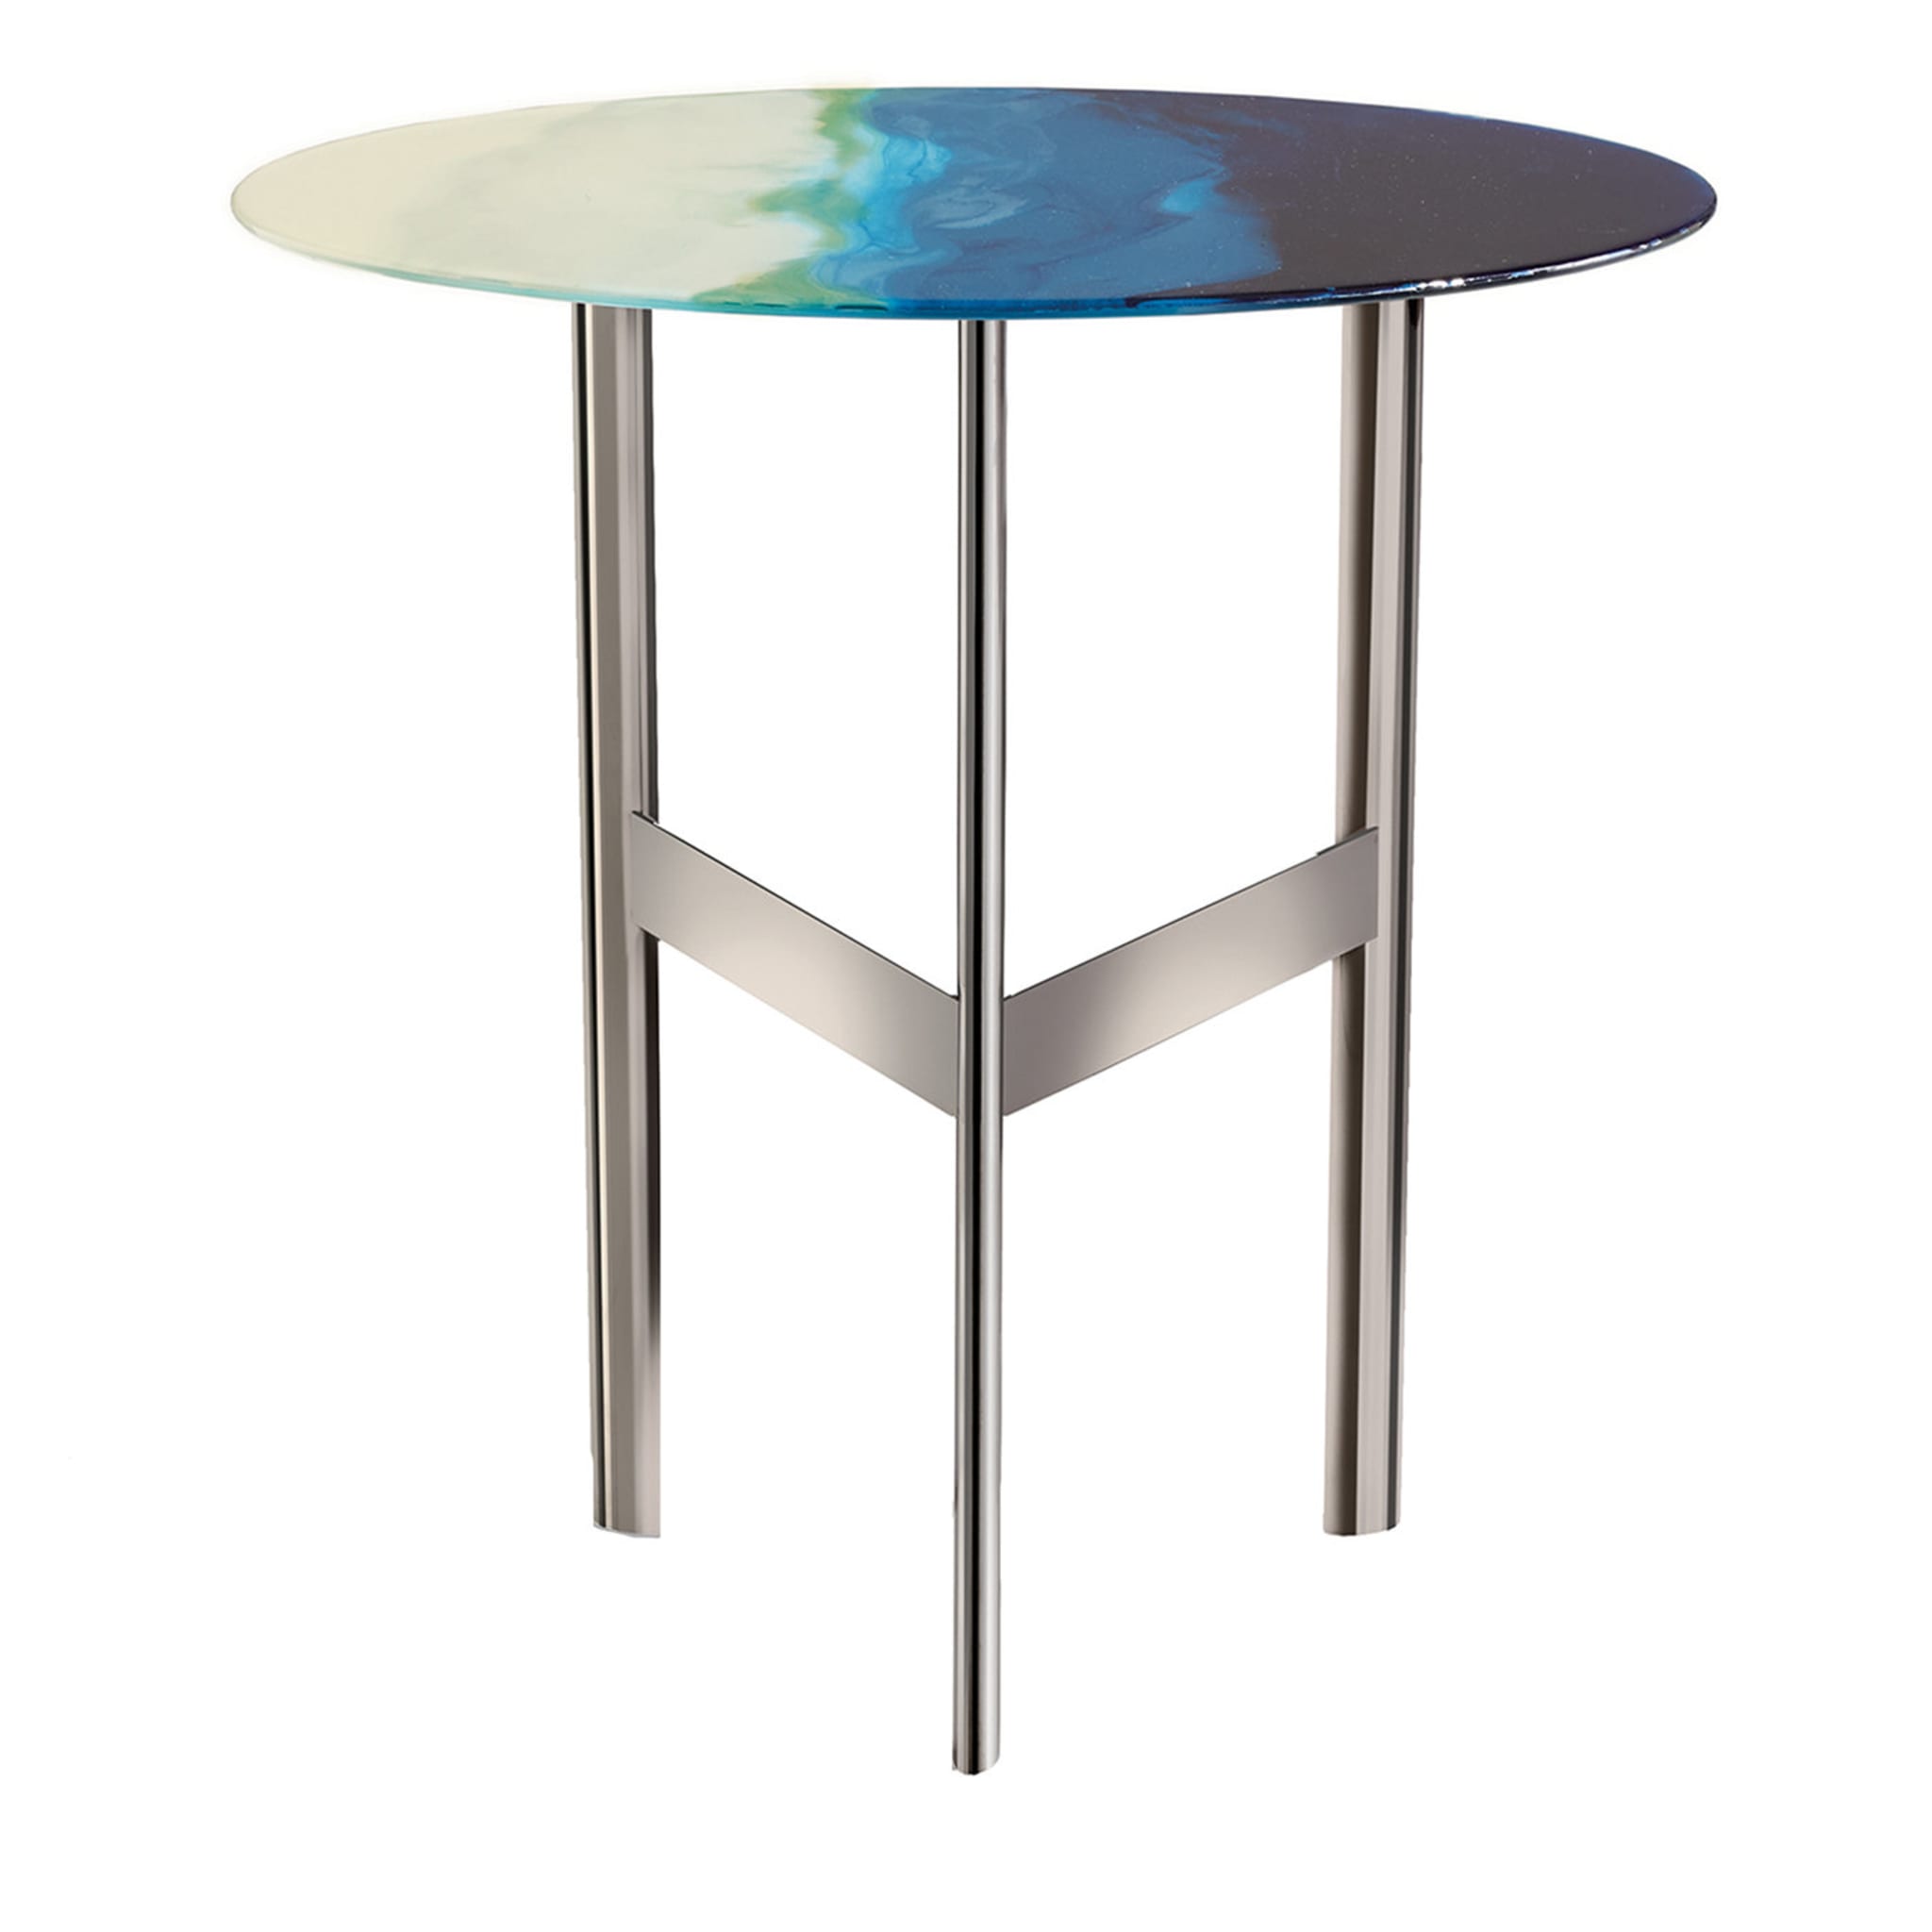 ART_GLASS BLUE SIDE TABLE - Main view